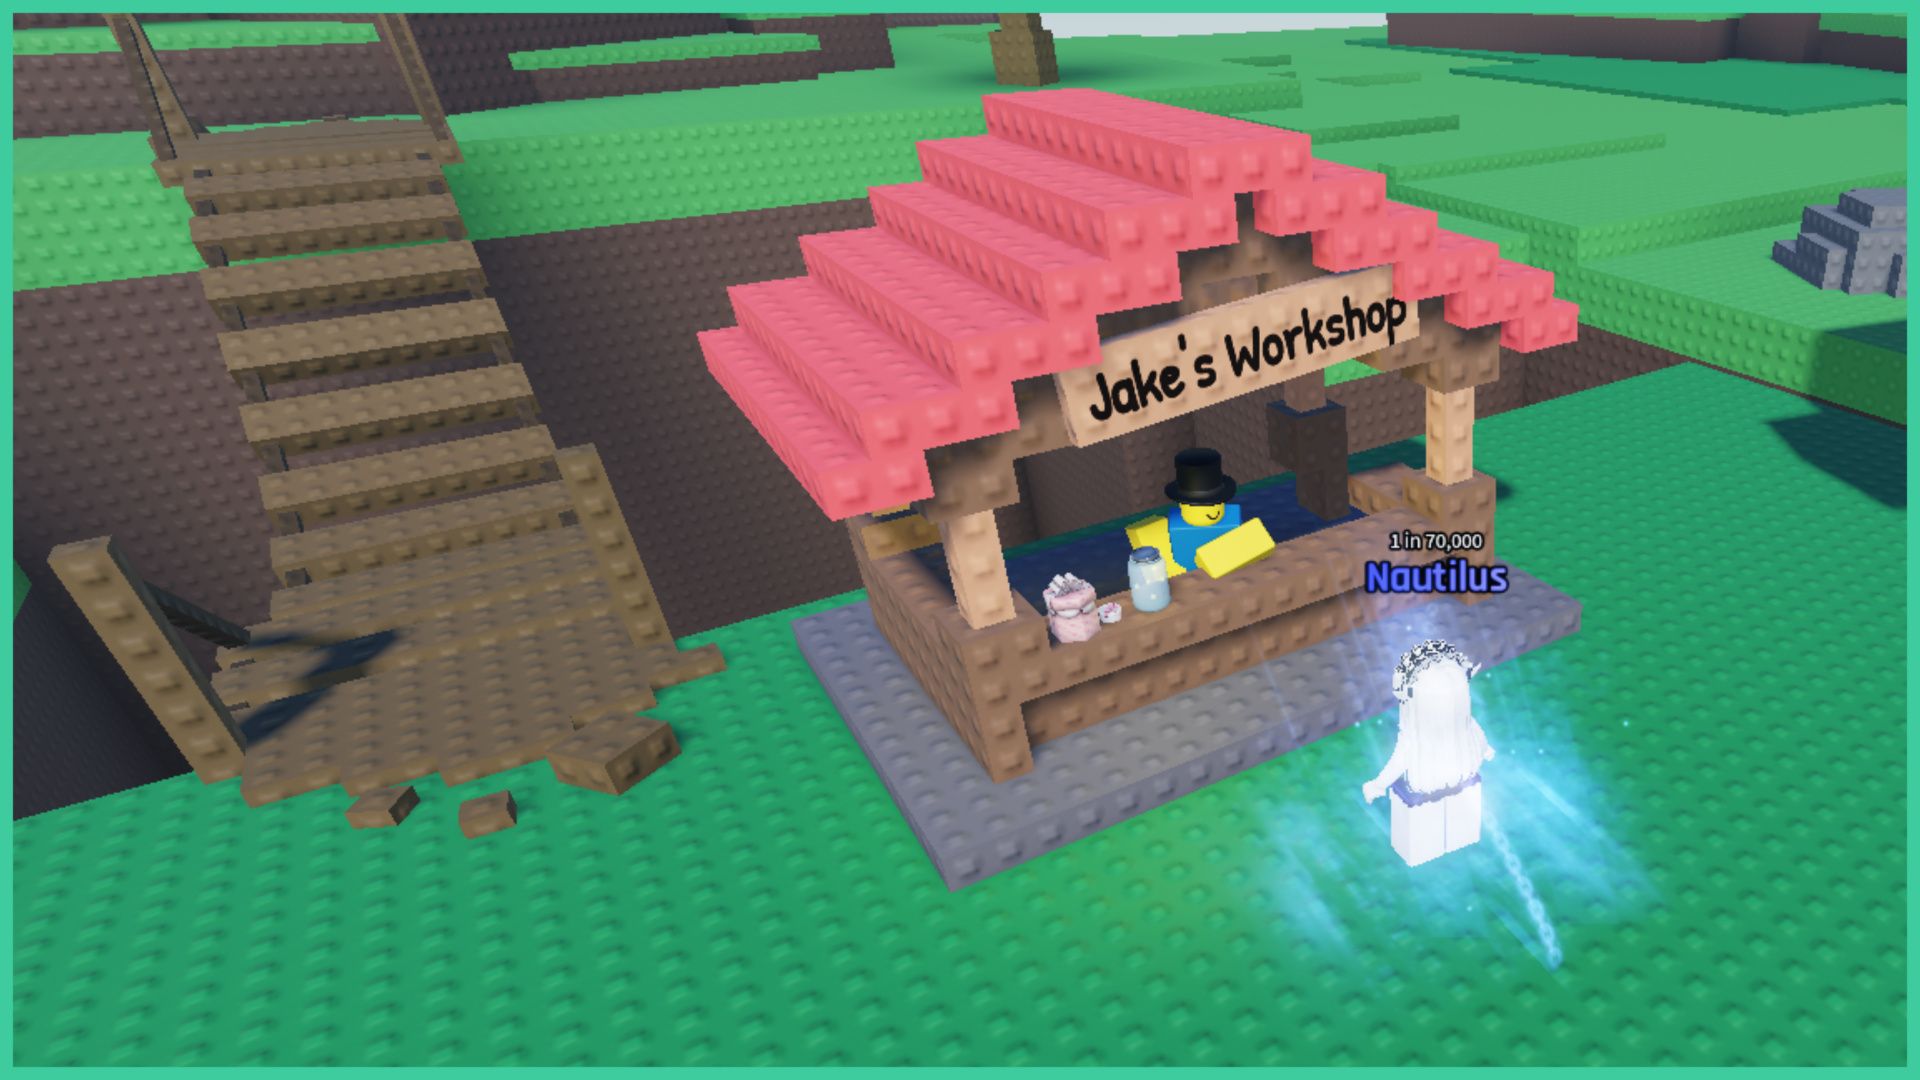 feature image for our sol's rng null guide, the image features a screenshot of a roblox player standing in front of the jake's workshop stall, which has a roblox character standing at the counter while wearing a top hat, there is a wood bridge that connects to another grass platform to the left